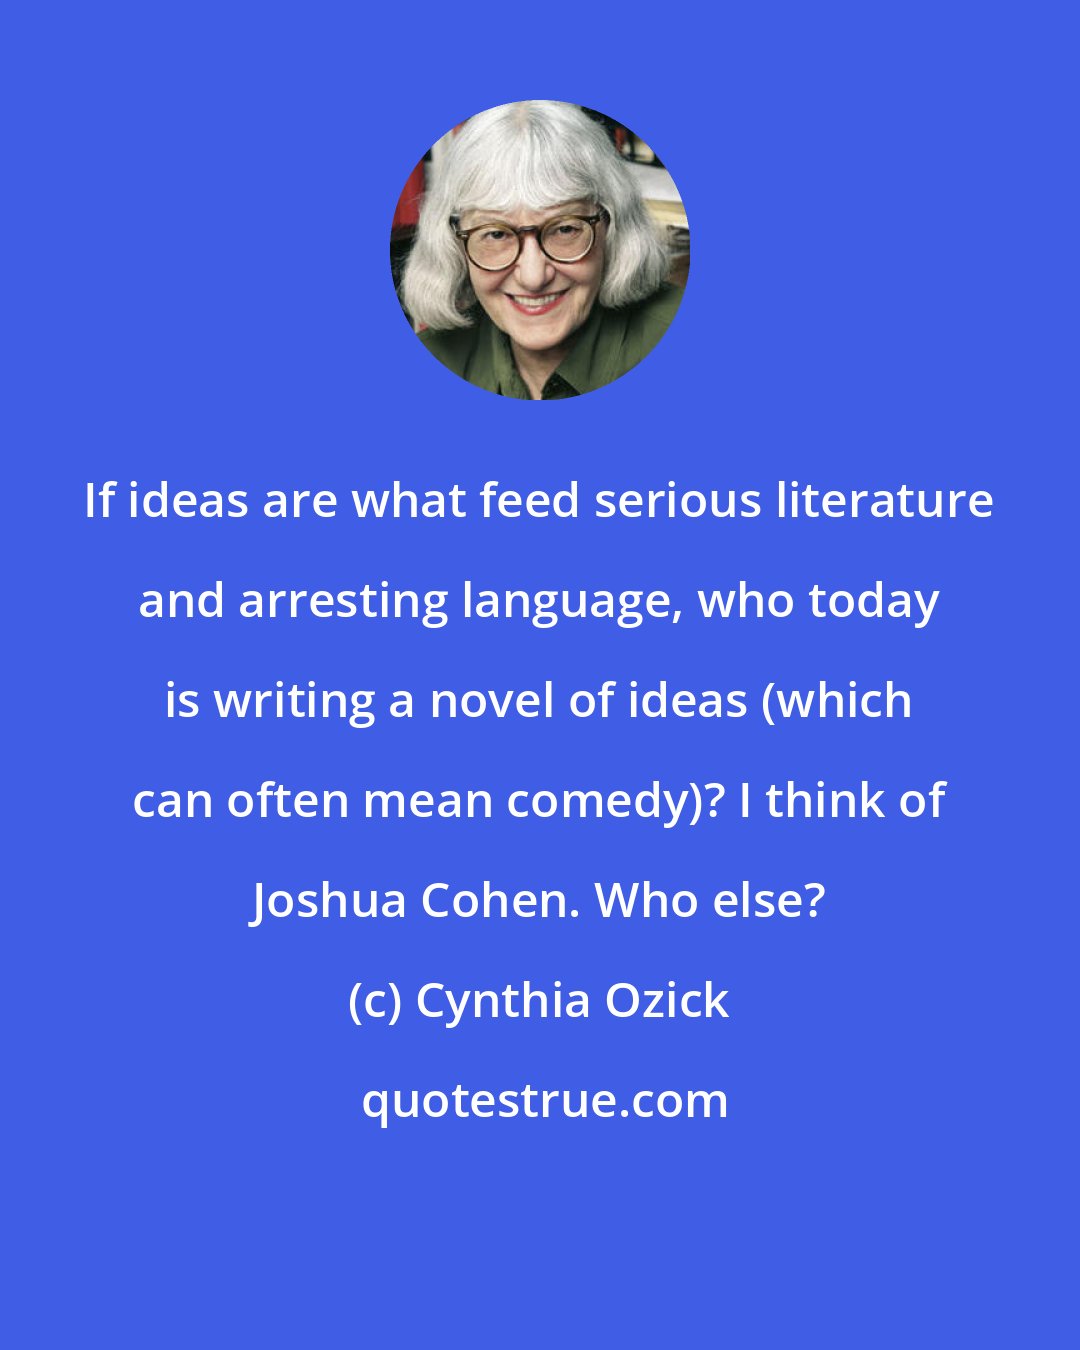 Cynthia Ozick: If ideas are what feed serious literature and arresting language, who today is writing a novel of ideas (which can often mean comedy)? I think of Joshua Cohen. Who else?